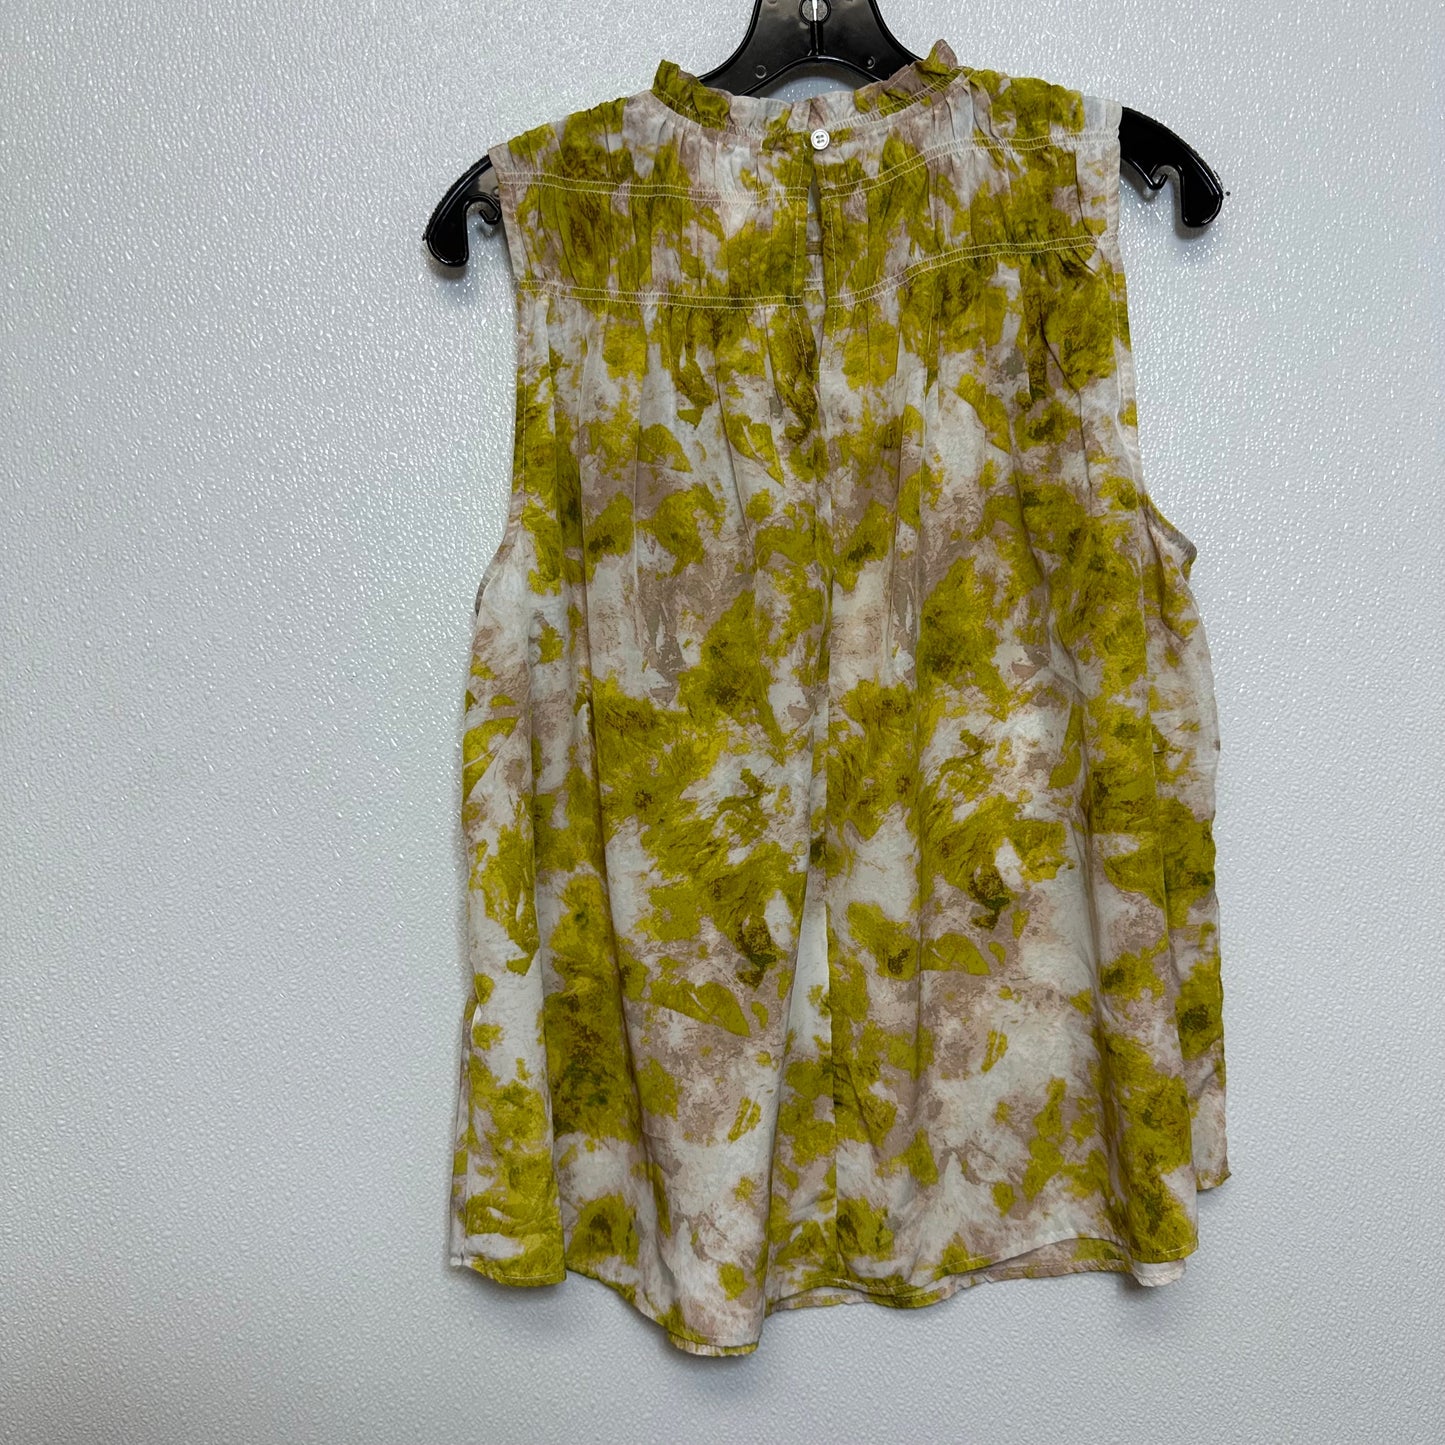 Top Sleeveless By Joie  Size: L